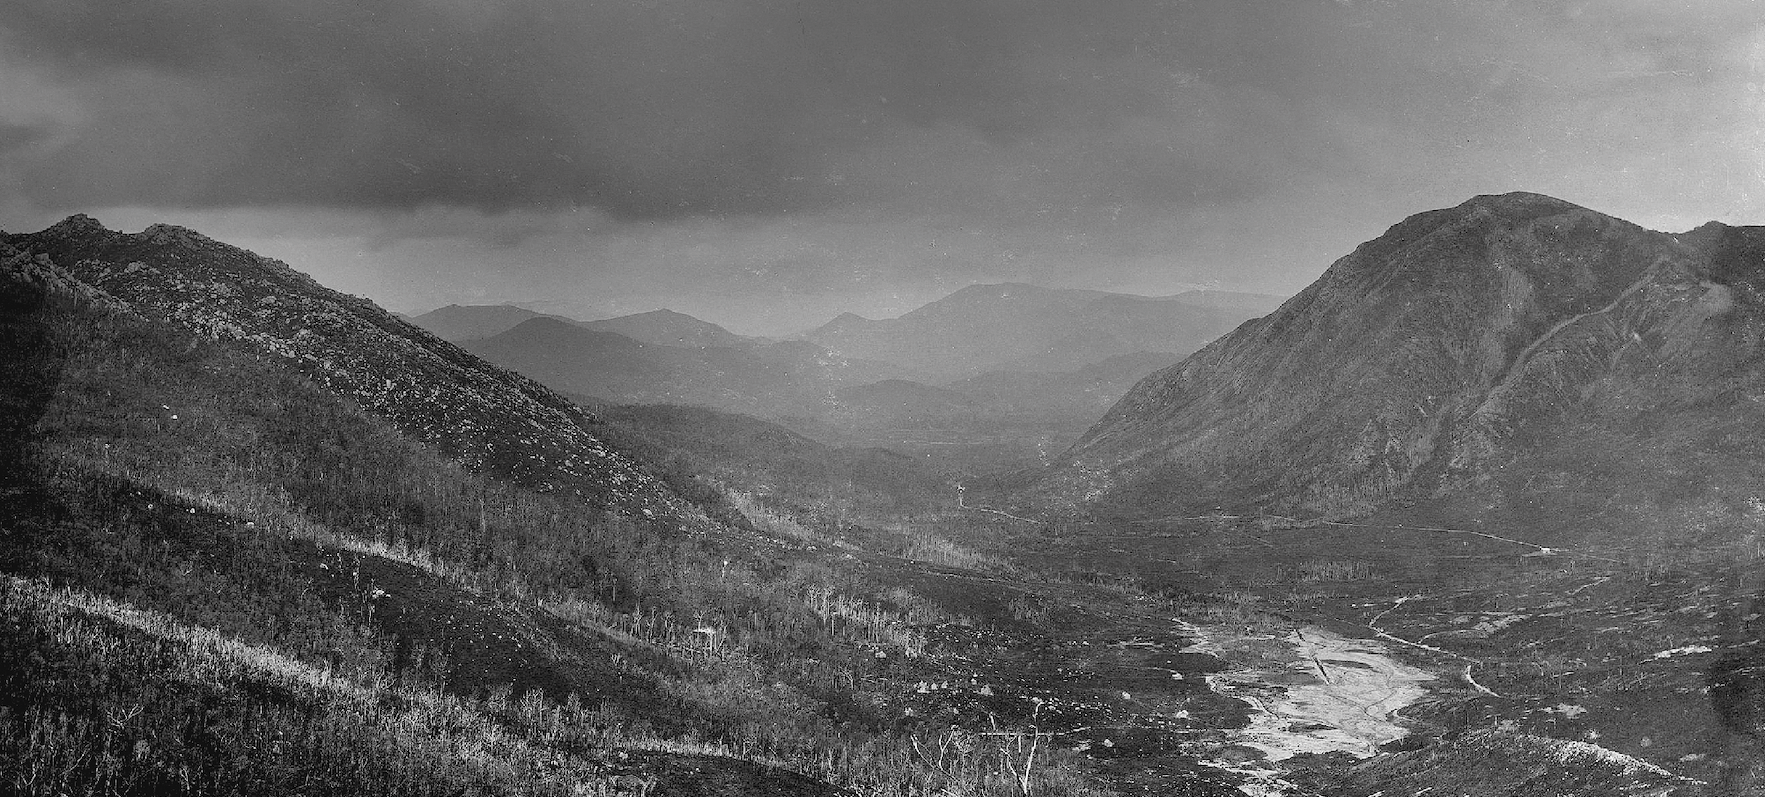 In the Footsteps of Charles Gould image. A black and white photo of zig-zagging tracks down the face of a mountain leading to wetlands at the base. Credit Beattie Hobart, Tasmanian Archive and Heritage Office.